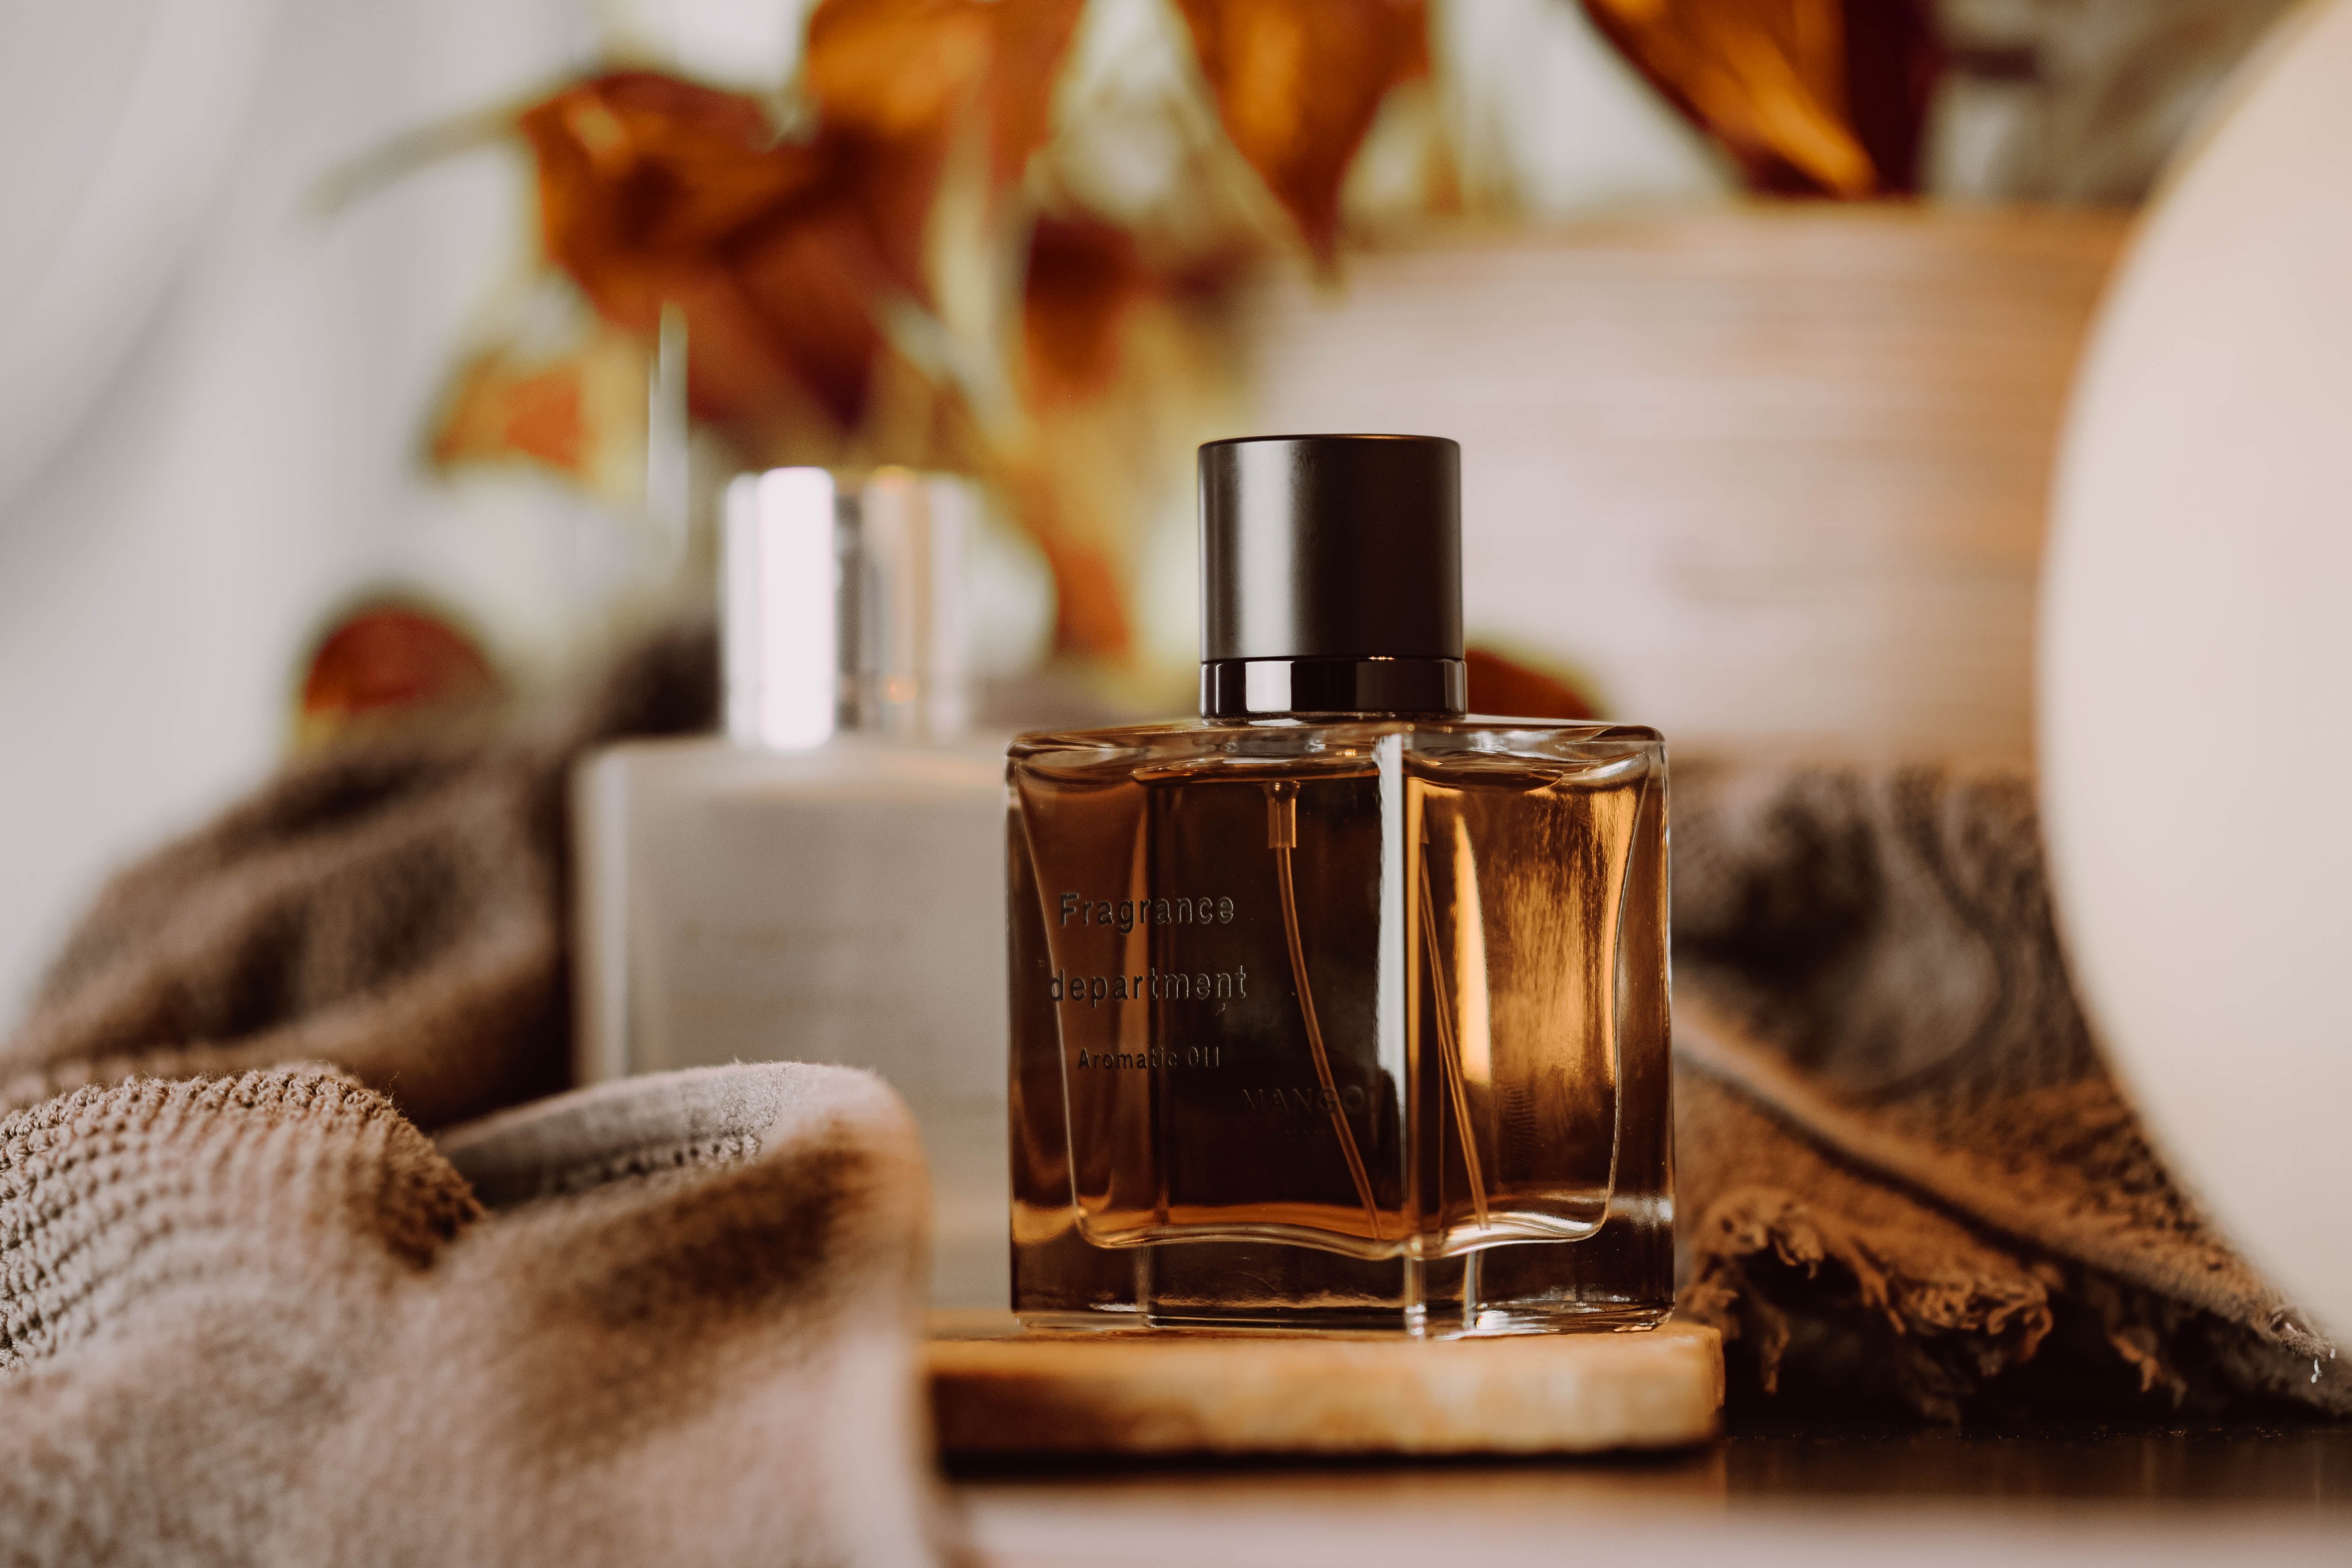 Why do natural perfumes ‘not last’?